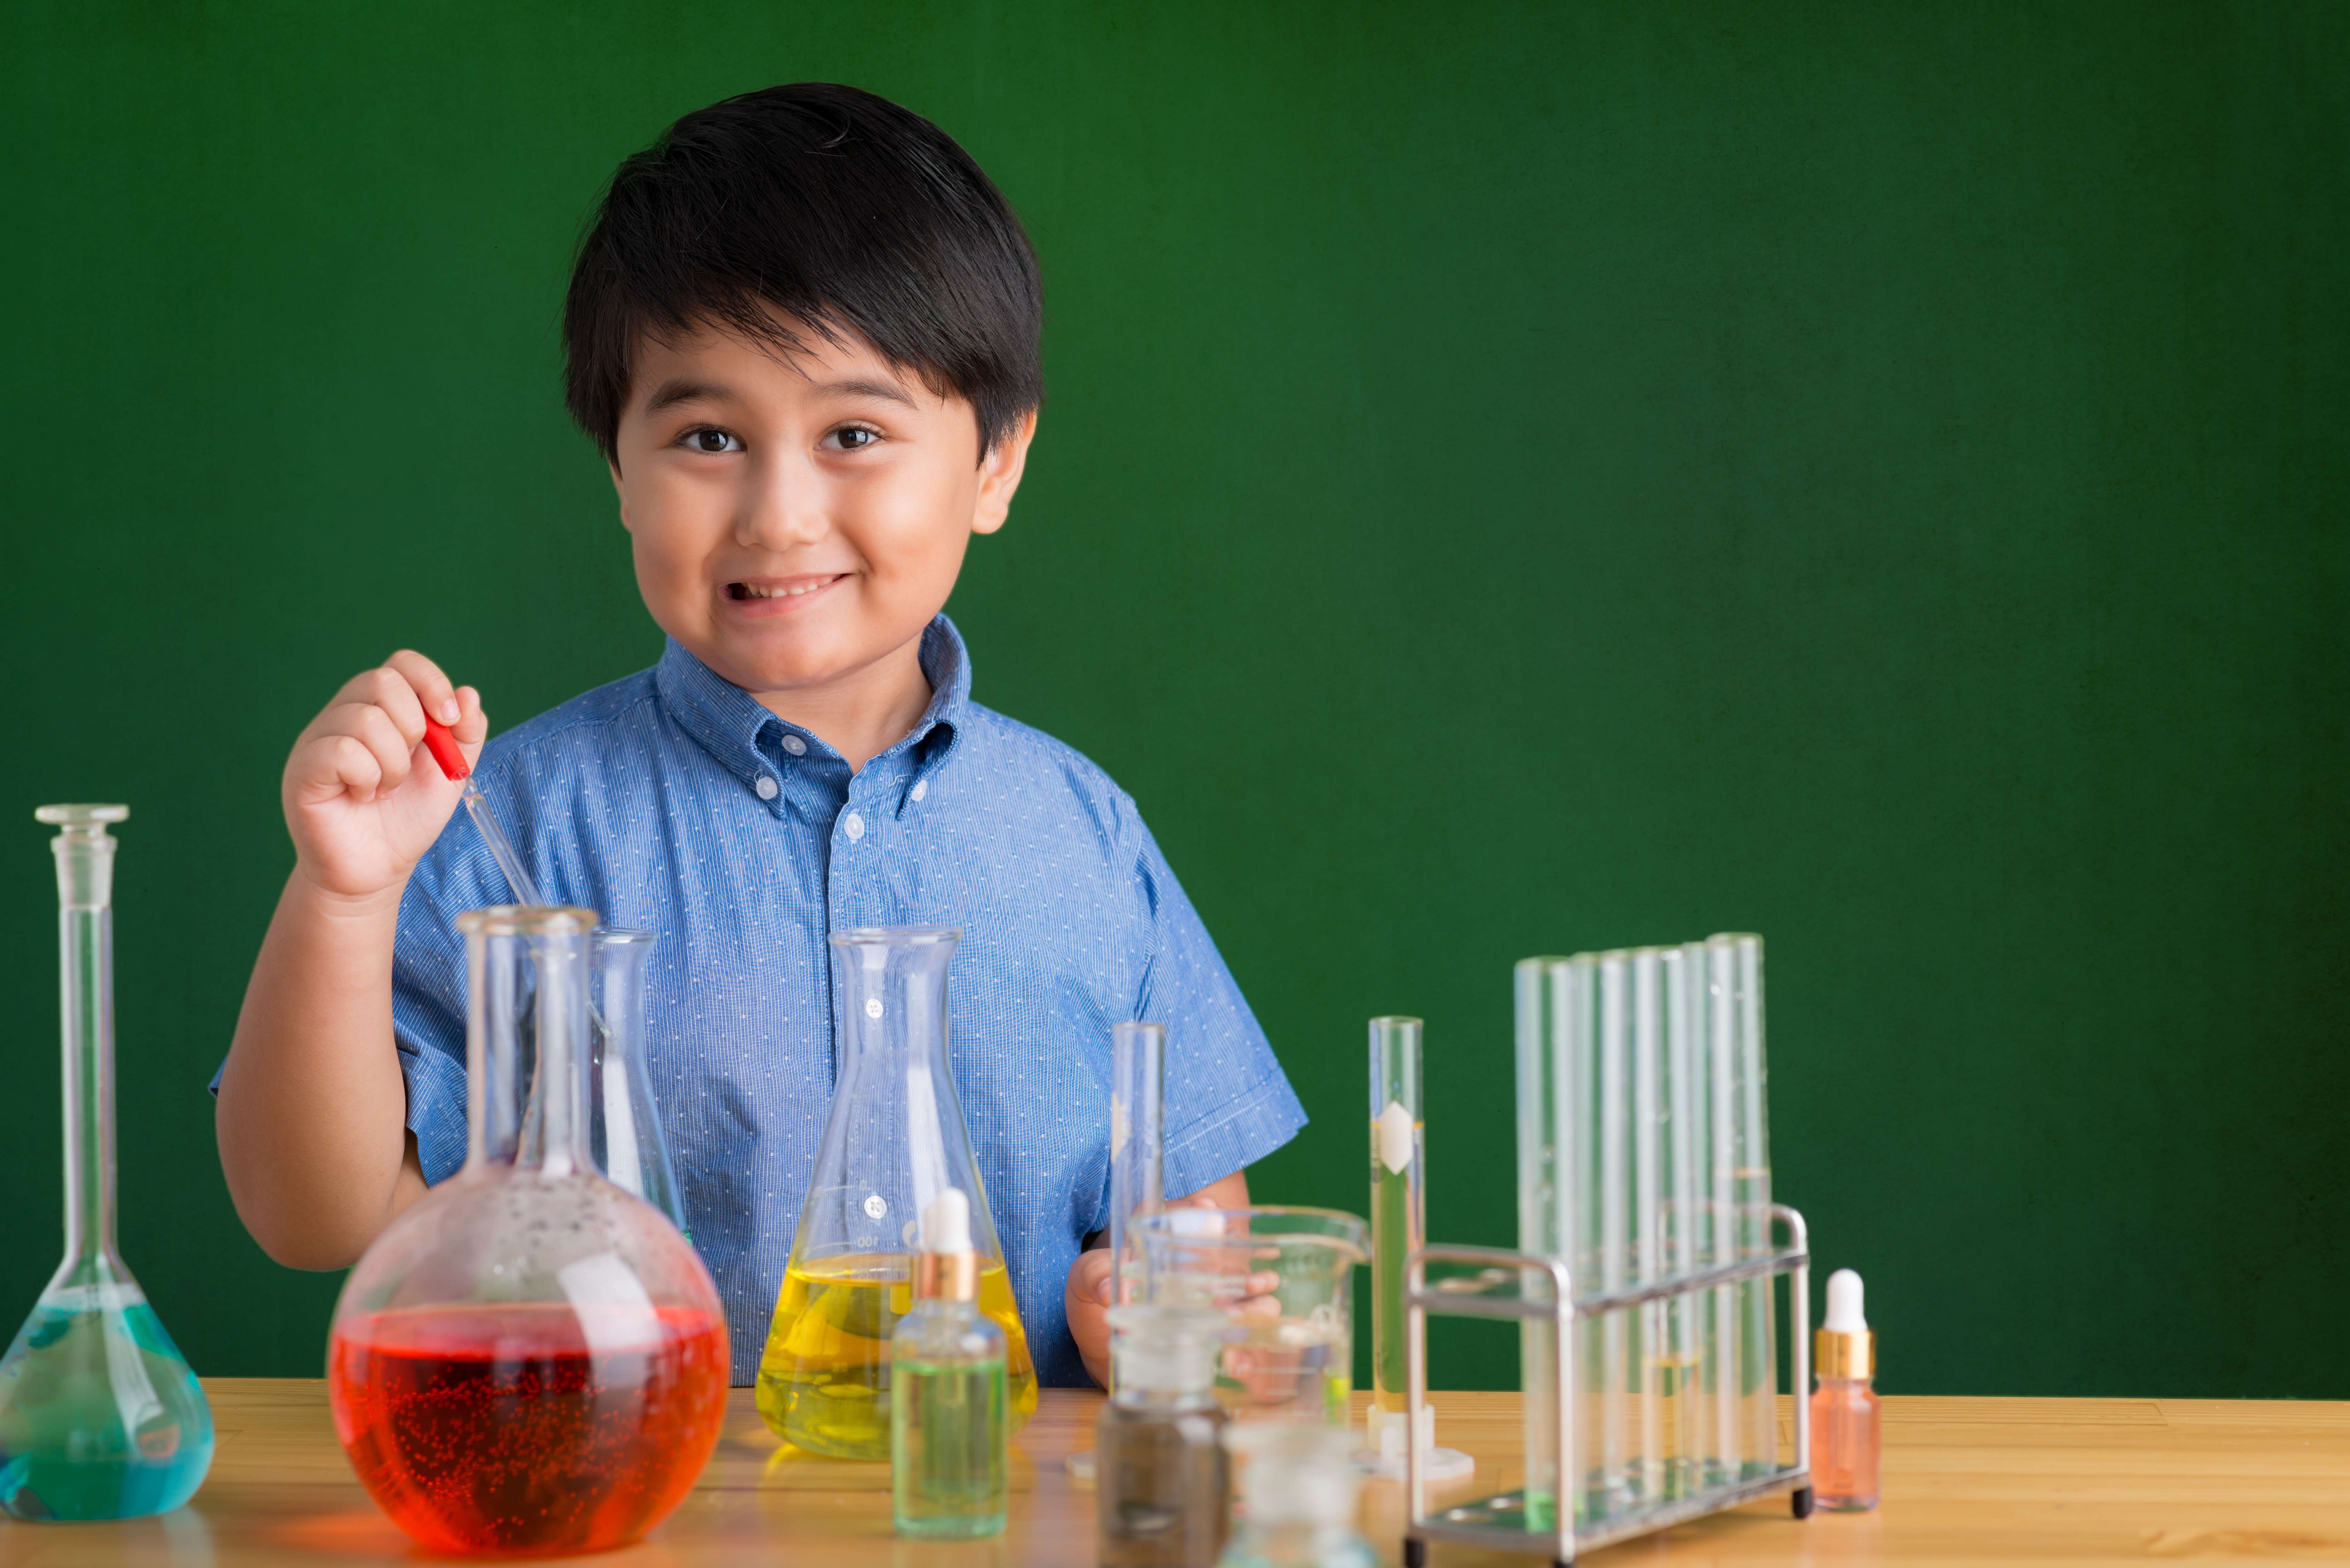 Conducting experiments in a laboratory is just one of many ways to learn about science.